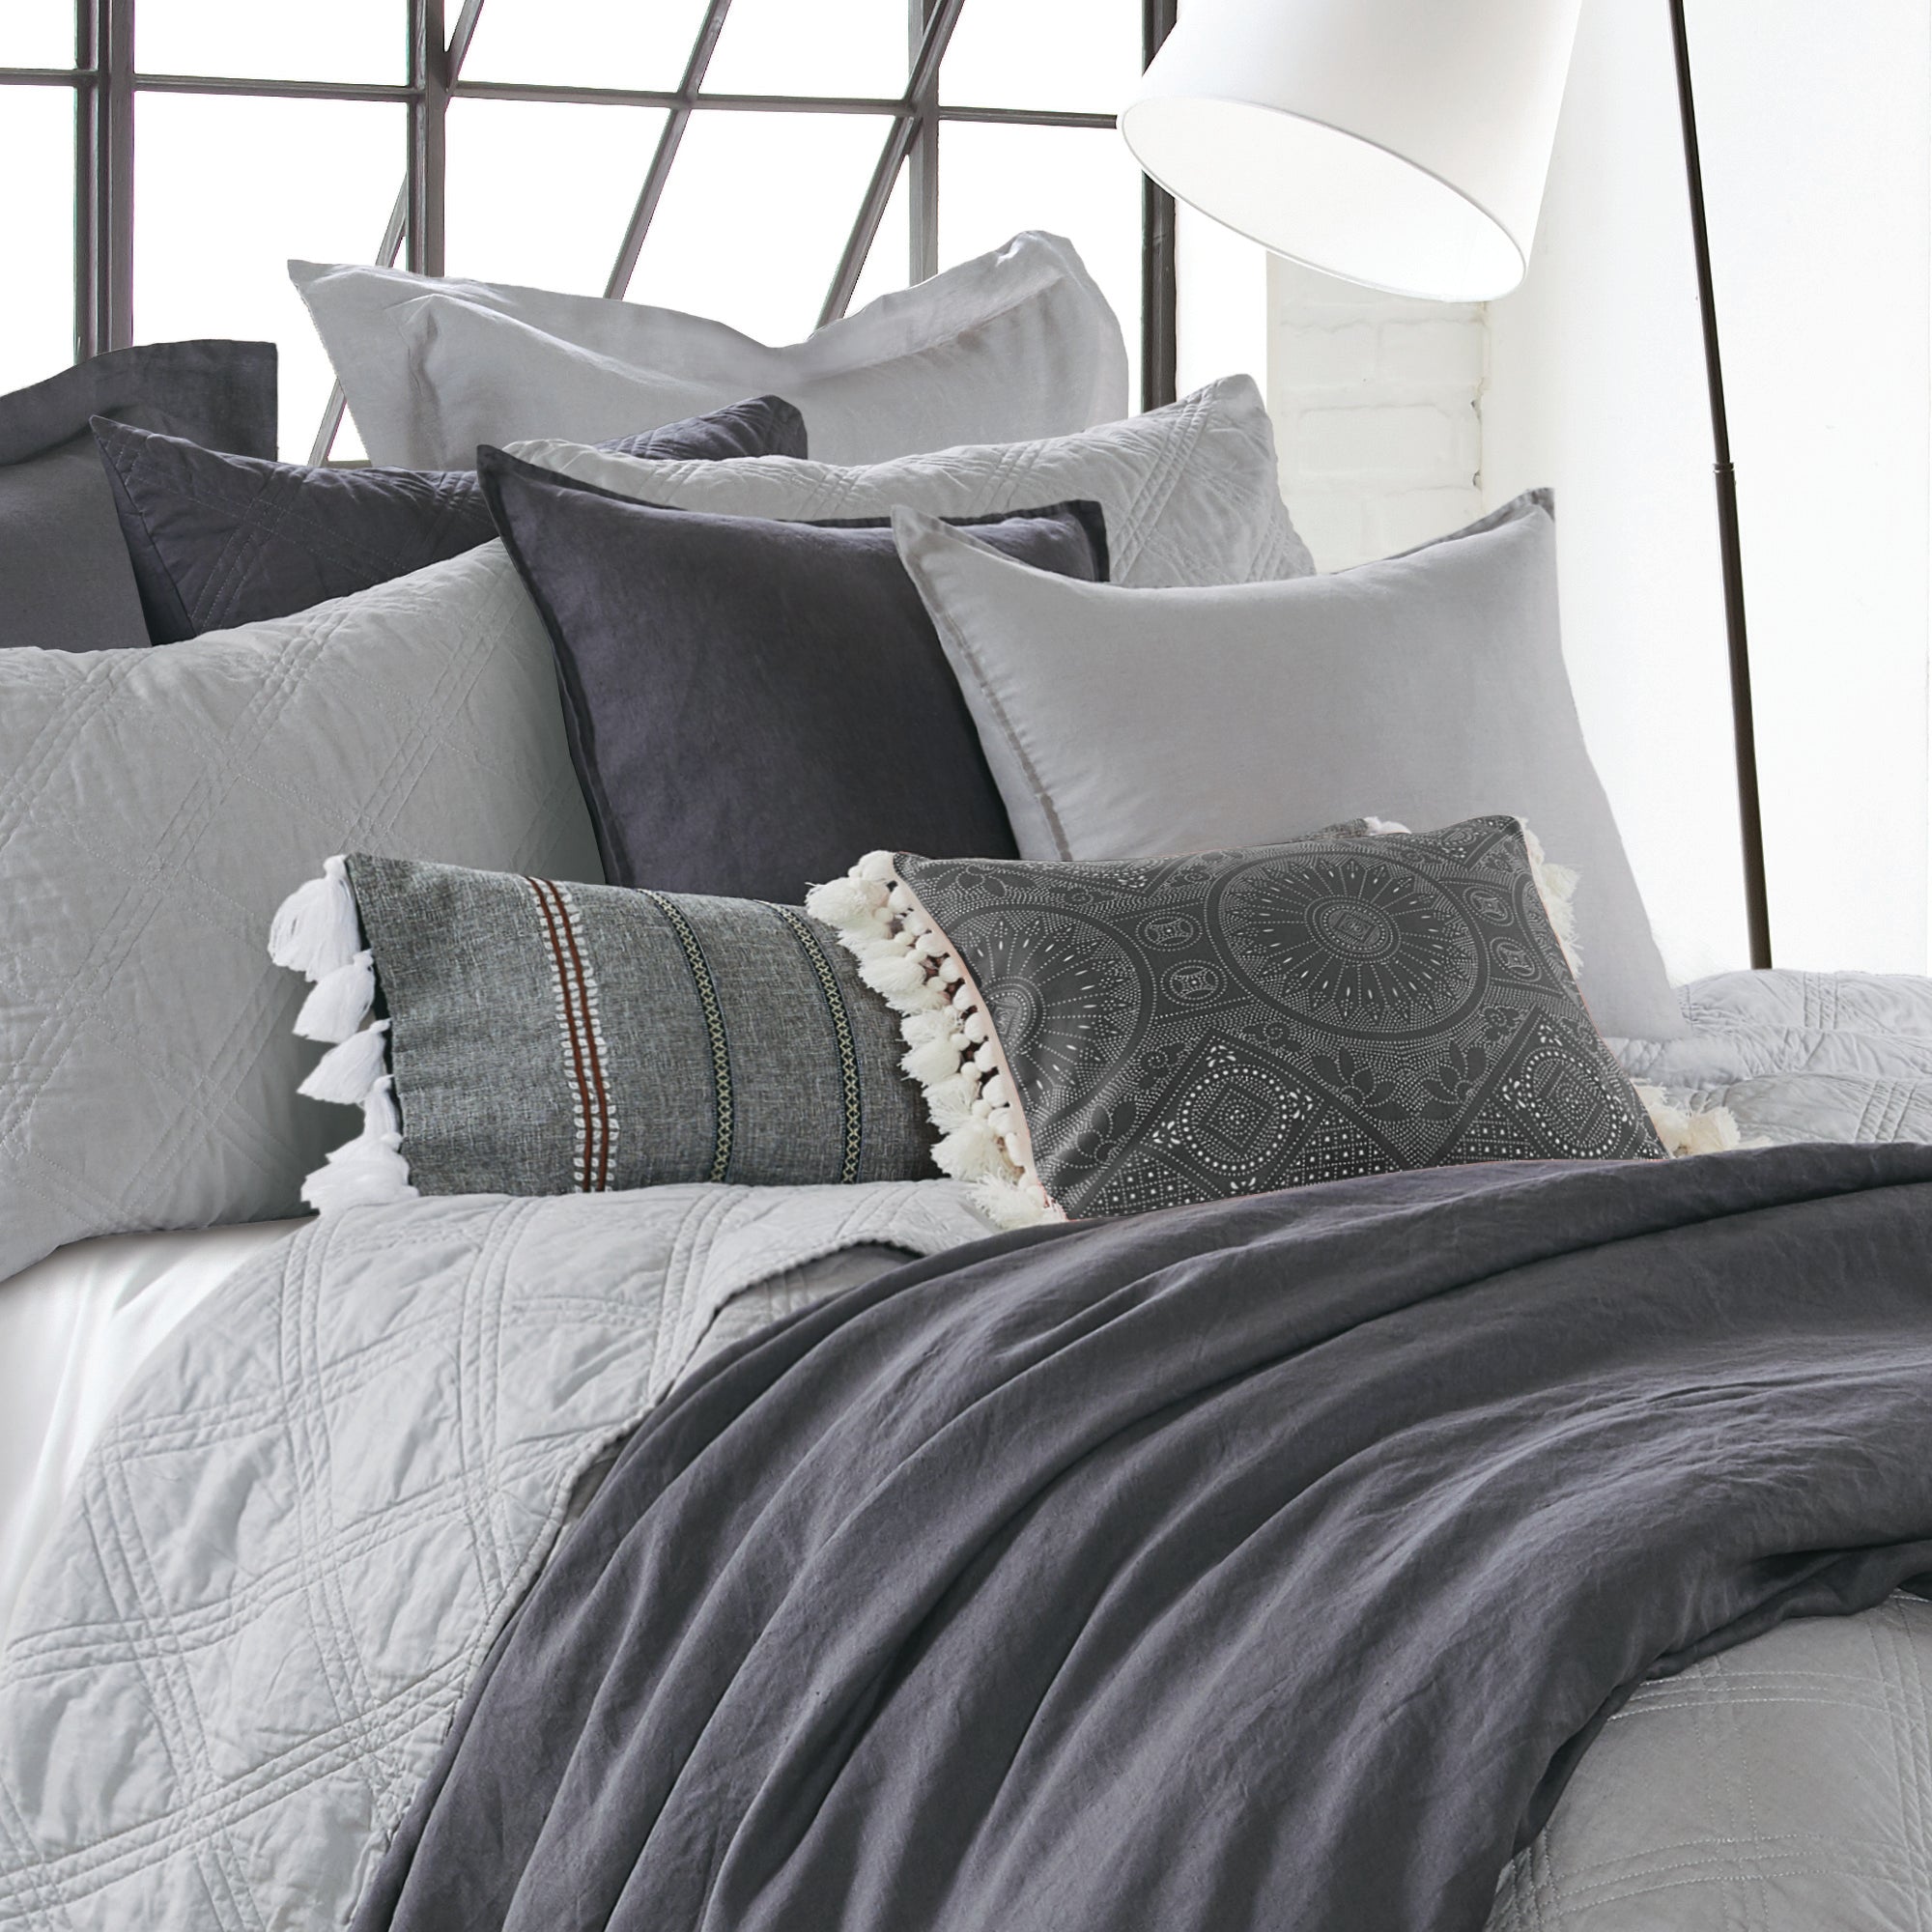 Levtex Home - Mills Waffle Grey Pewter Duvet Cover Set - King